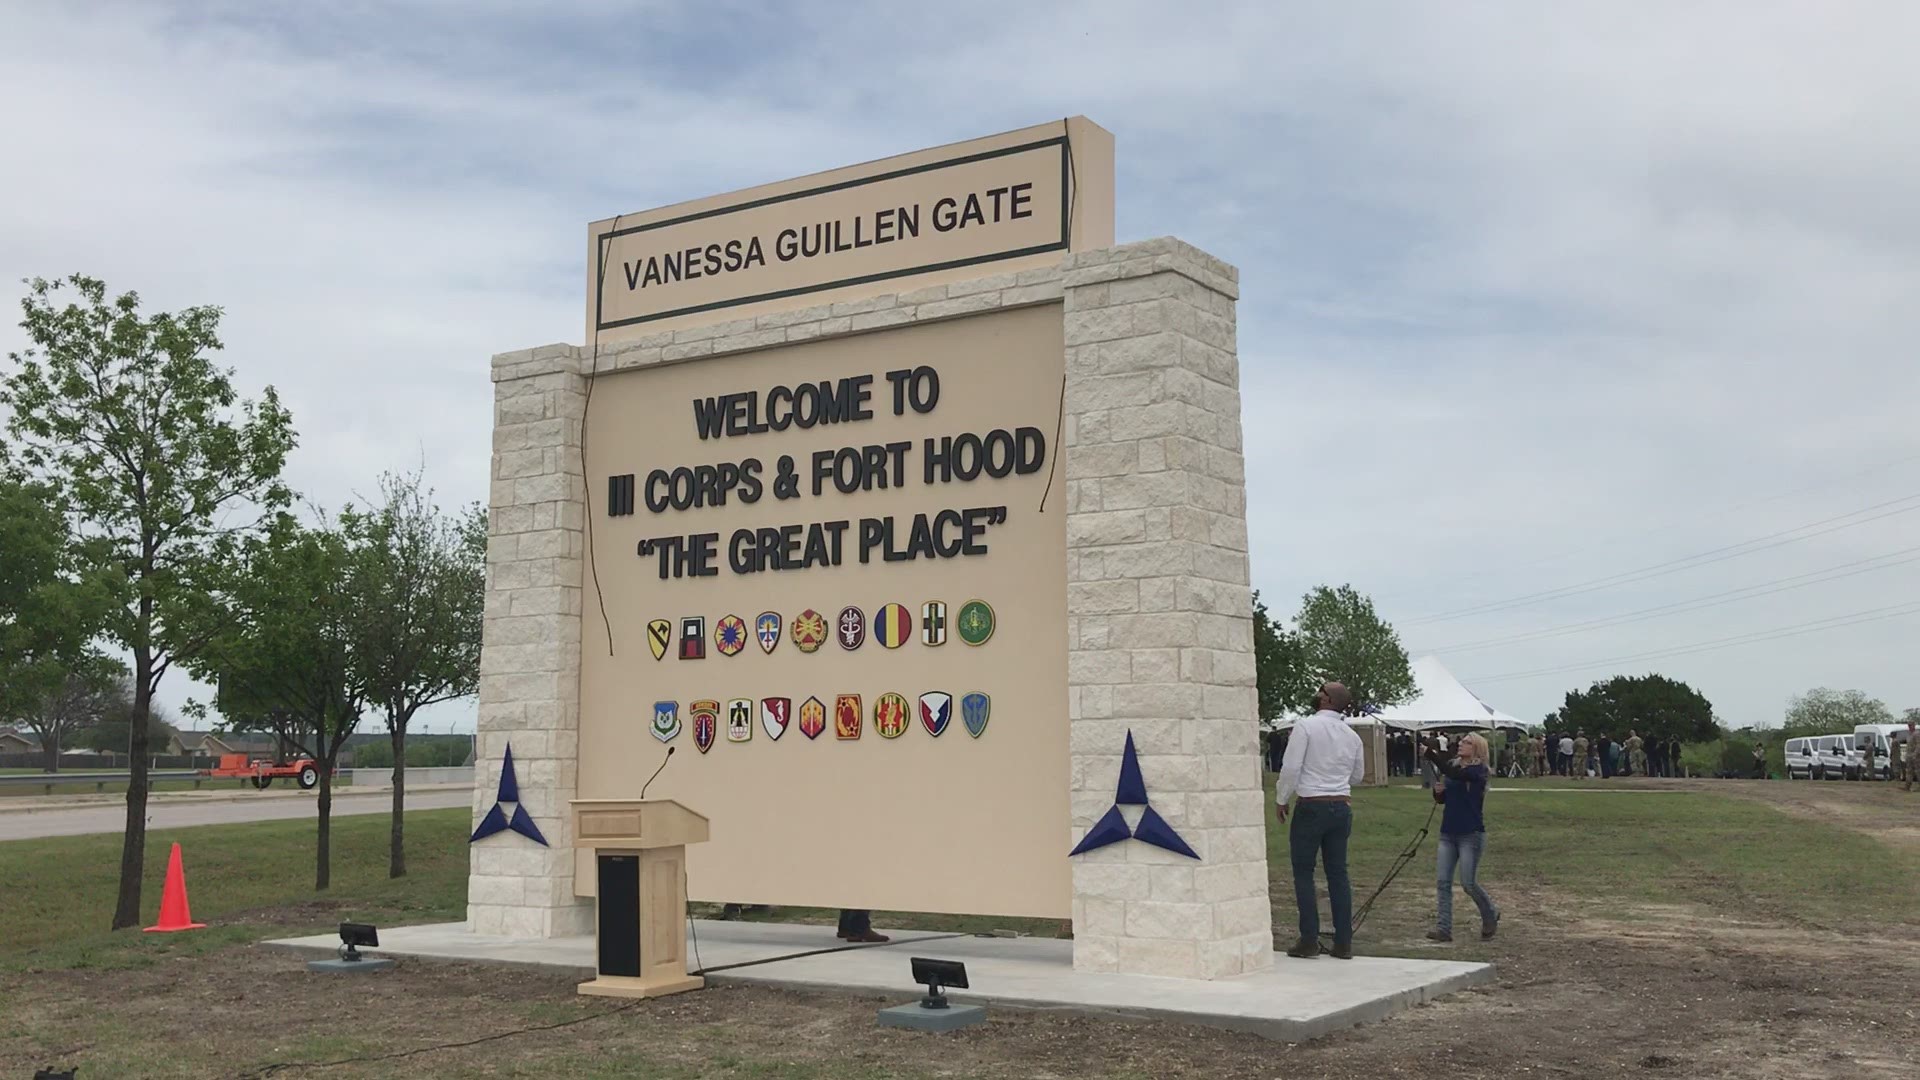 The gate named after Spc. Guillen was unveiled Monday in a ceremony attended by the Guillen family.